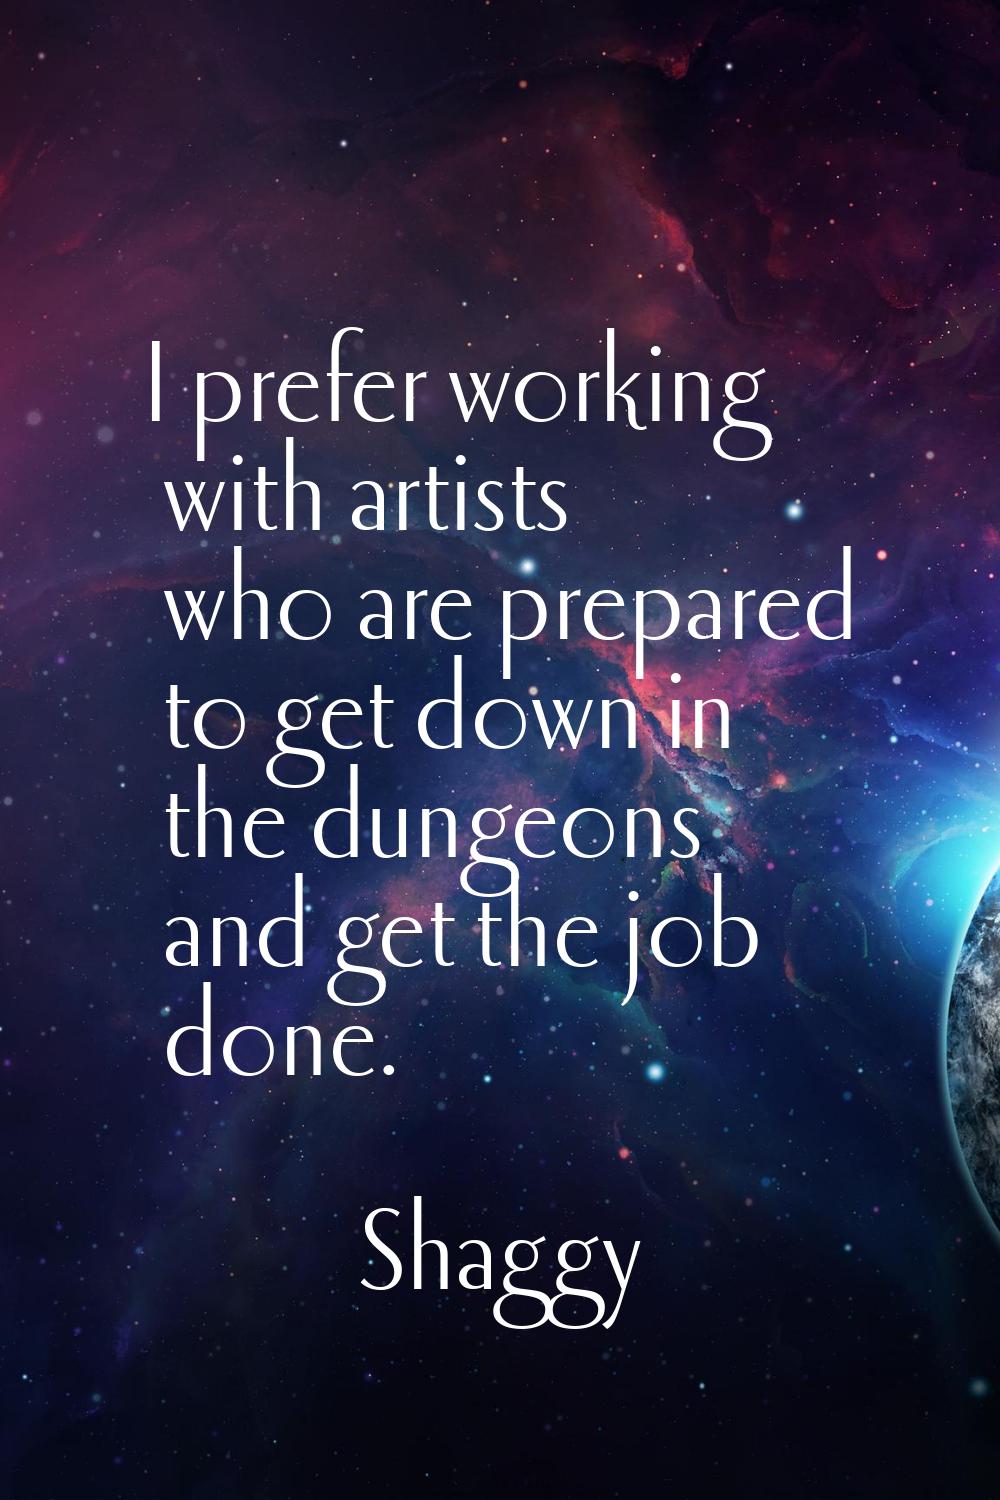 I prefer working with artists who are prepared to get down in the dungeons and get the job done.